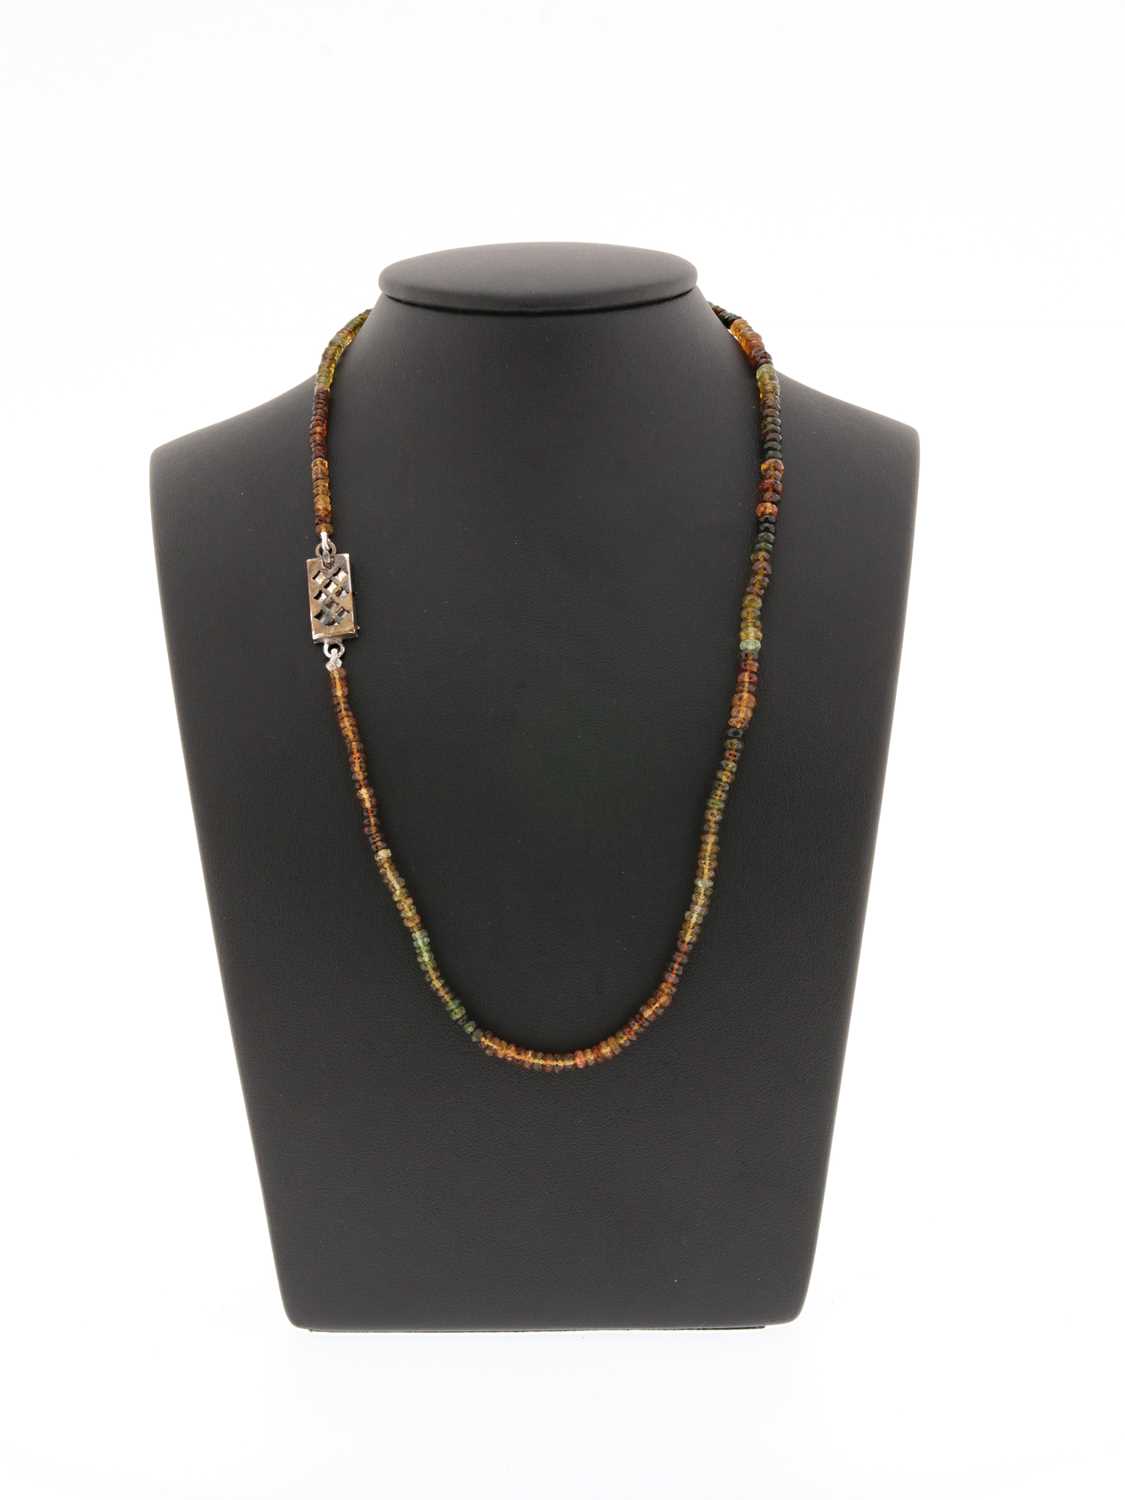 Lot 538 - Tourmaline Necklace with Silver Lock